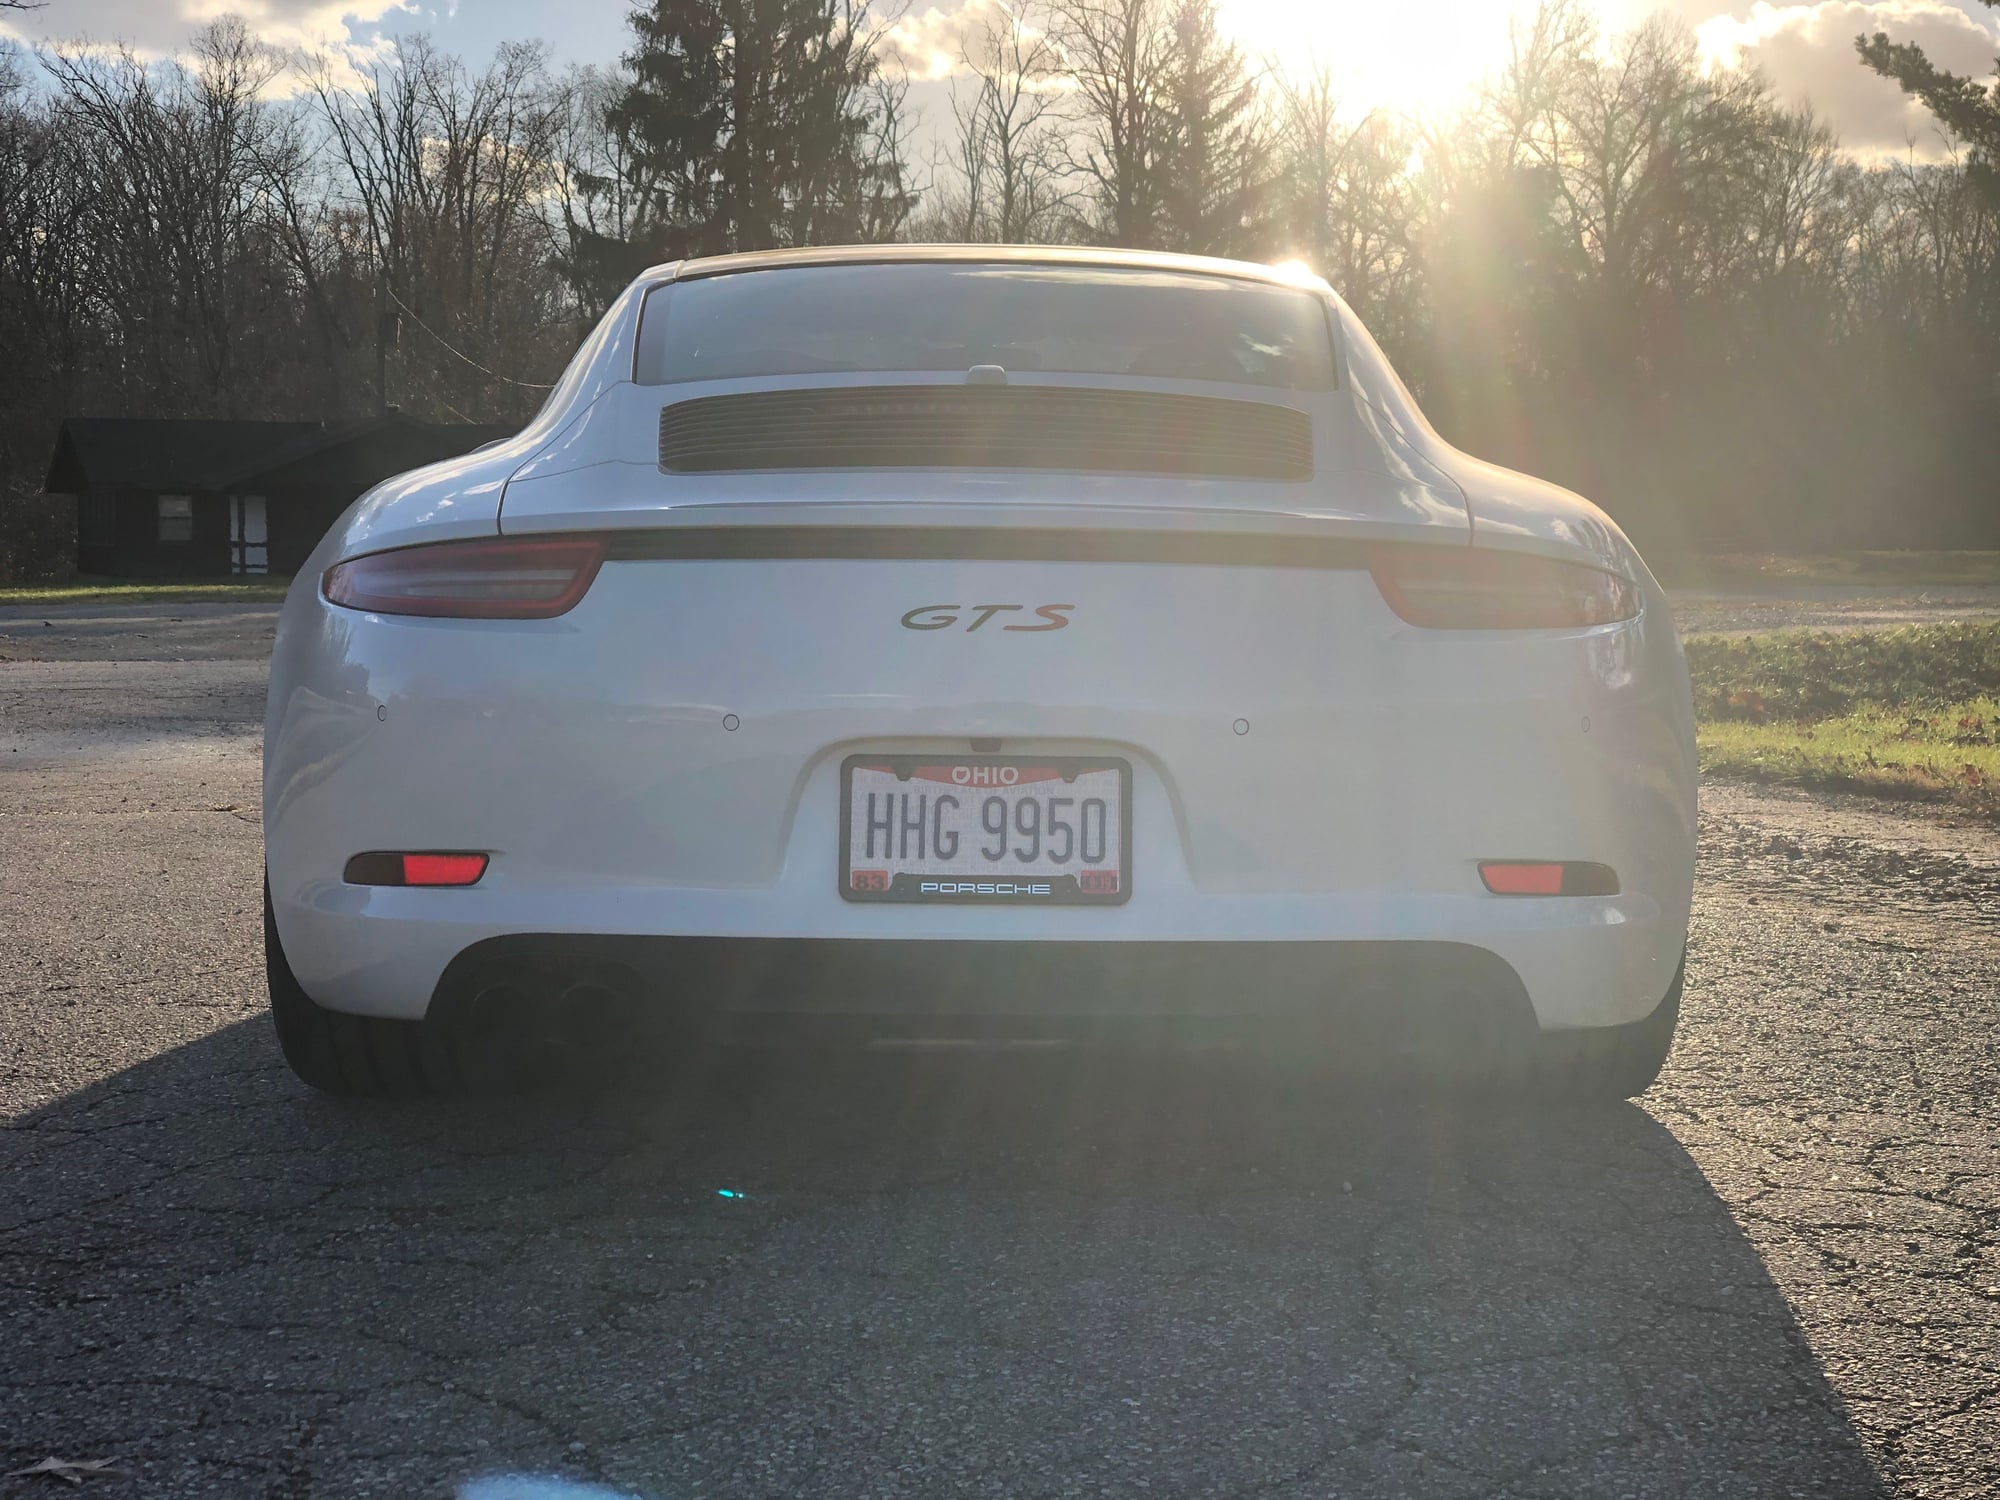 2015 Porsche 911 - FS: 2015 911 GTS - Used - VIN To Be Provided - 21,000 Miles - 6 cyl - 2WD - White - Cincinnati, OH 45039, United States